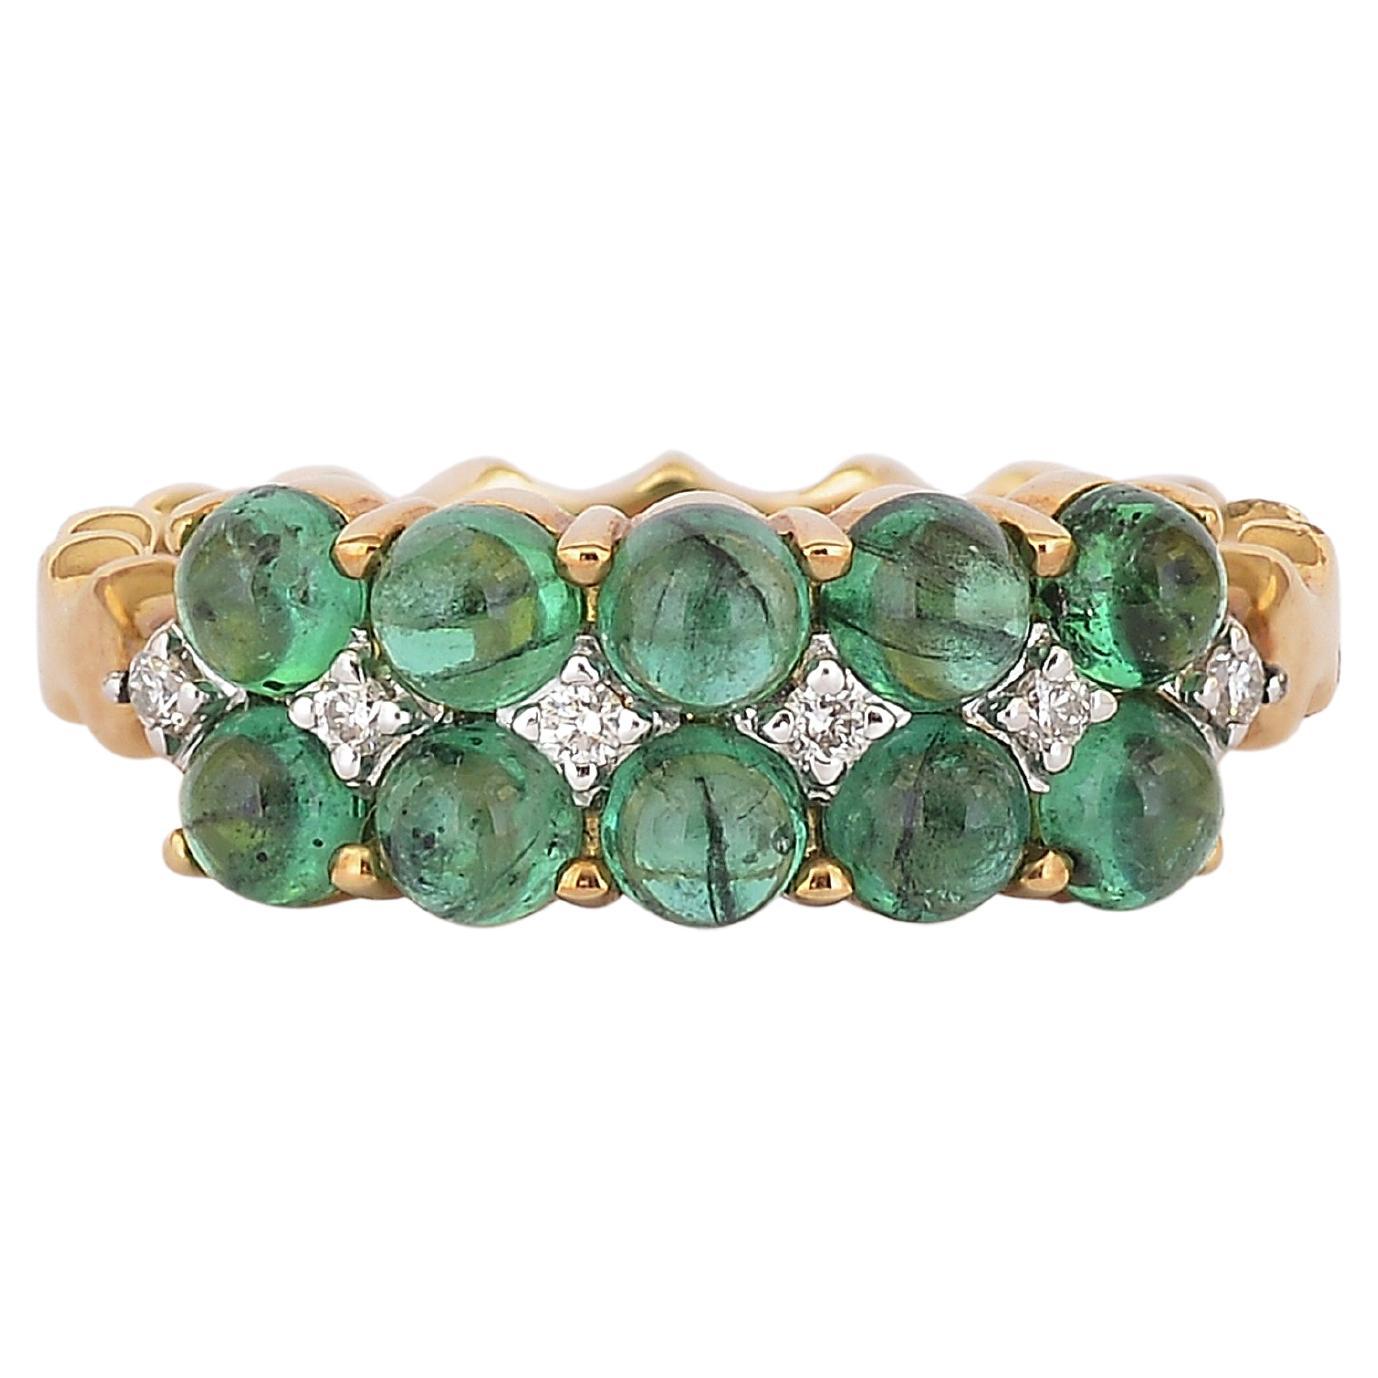 A elegant, dainty yet bold ring with fine quality Emerald Round Cabochons set in a row one under the other with white diamonds. The shiny Emeralds look even nicer when light passes through them.
We have used top quality diamonds in the ring. 
Its